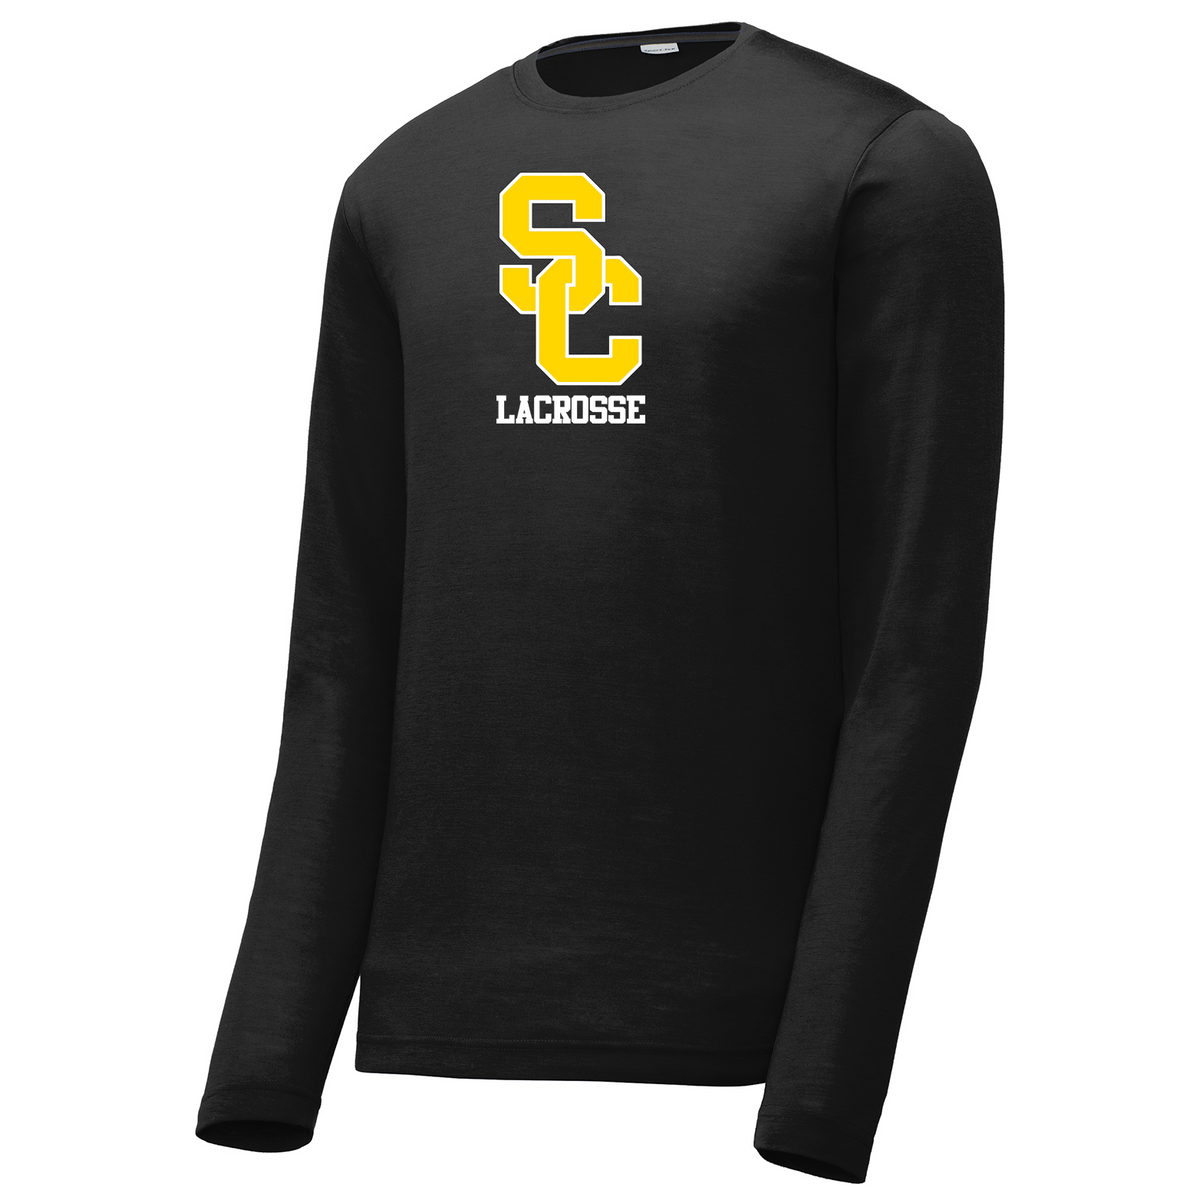 South Carroll Lacrosse Long Sleeve CottonTouch Performance Shirt